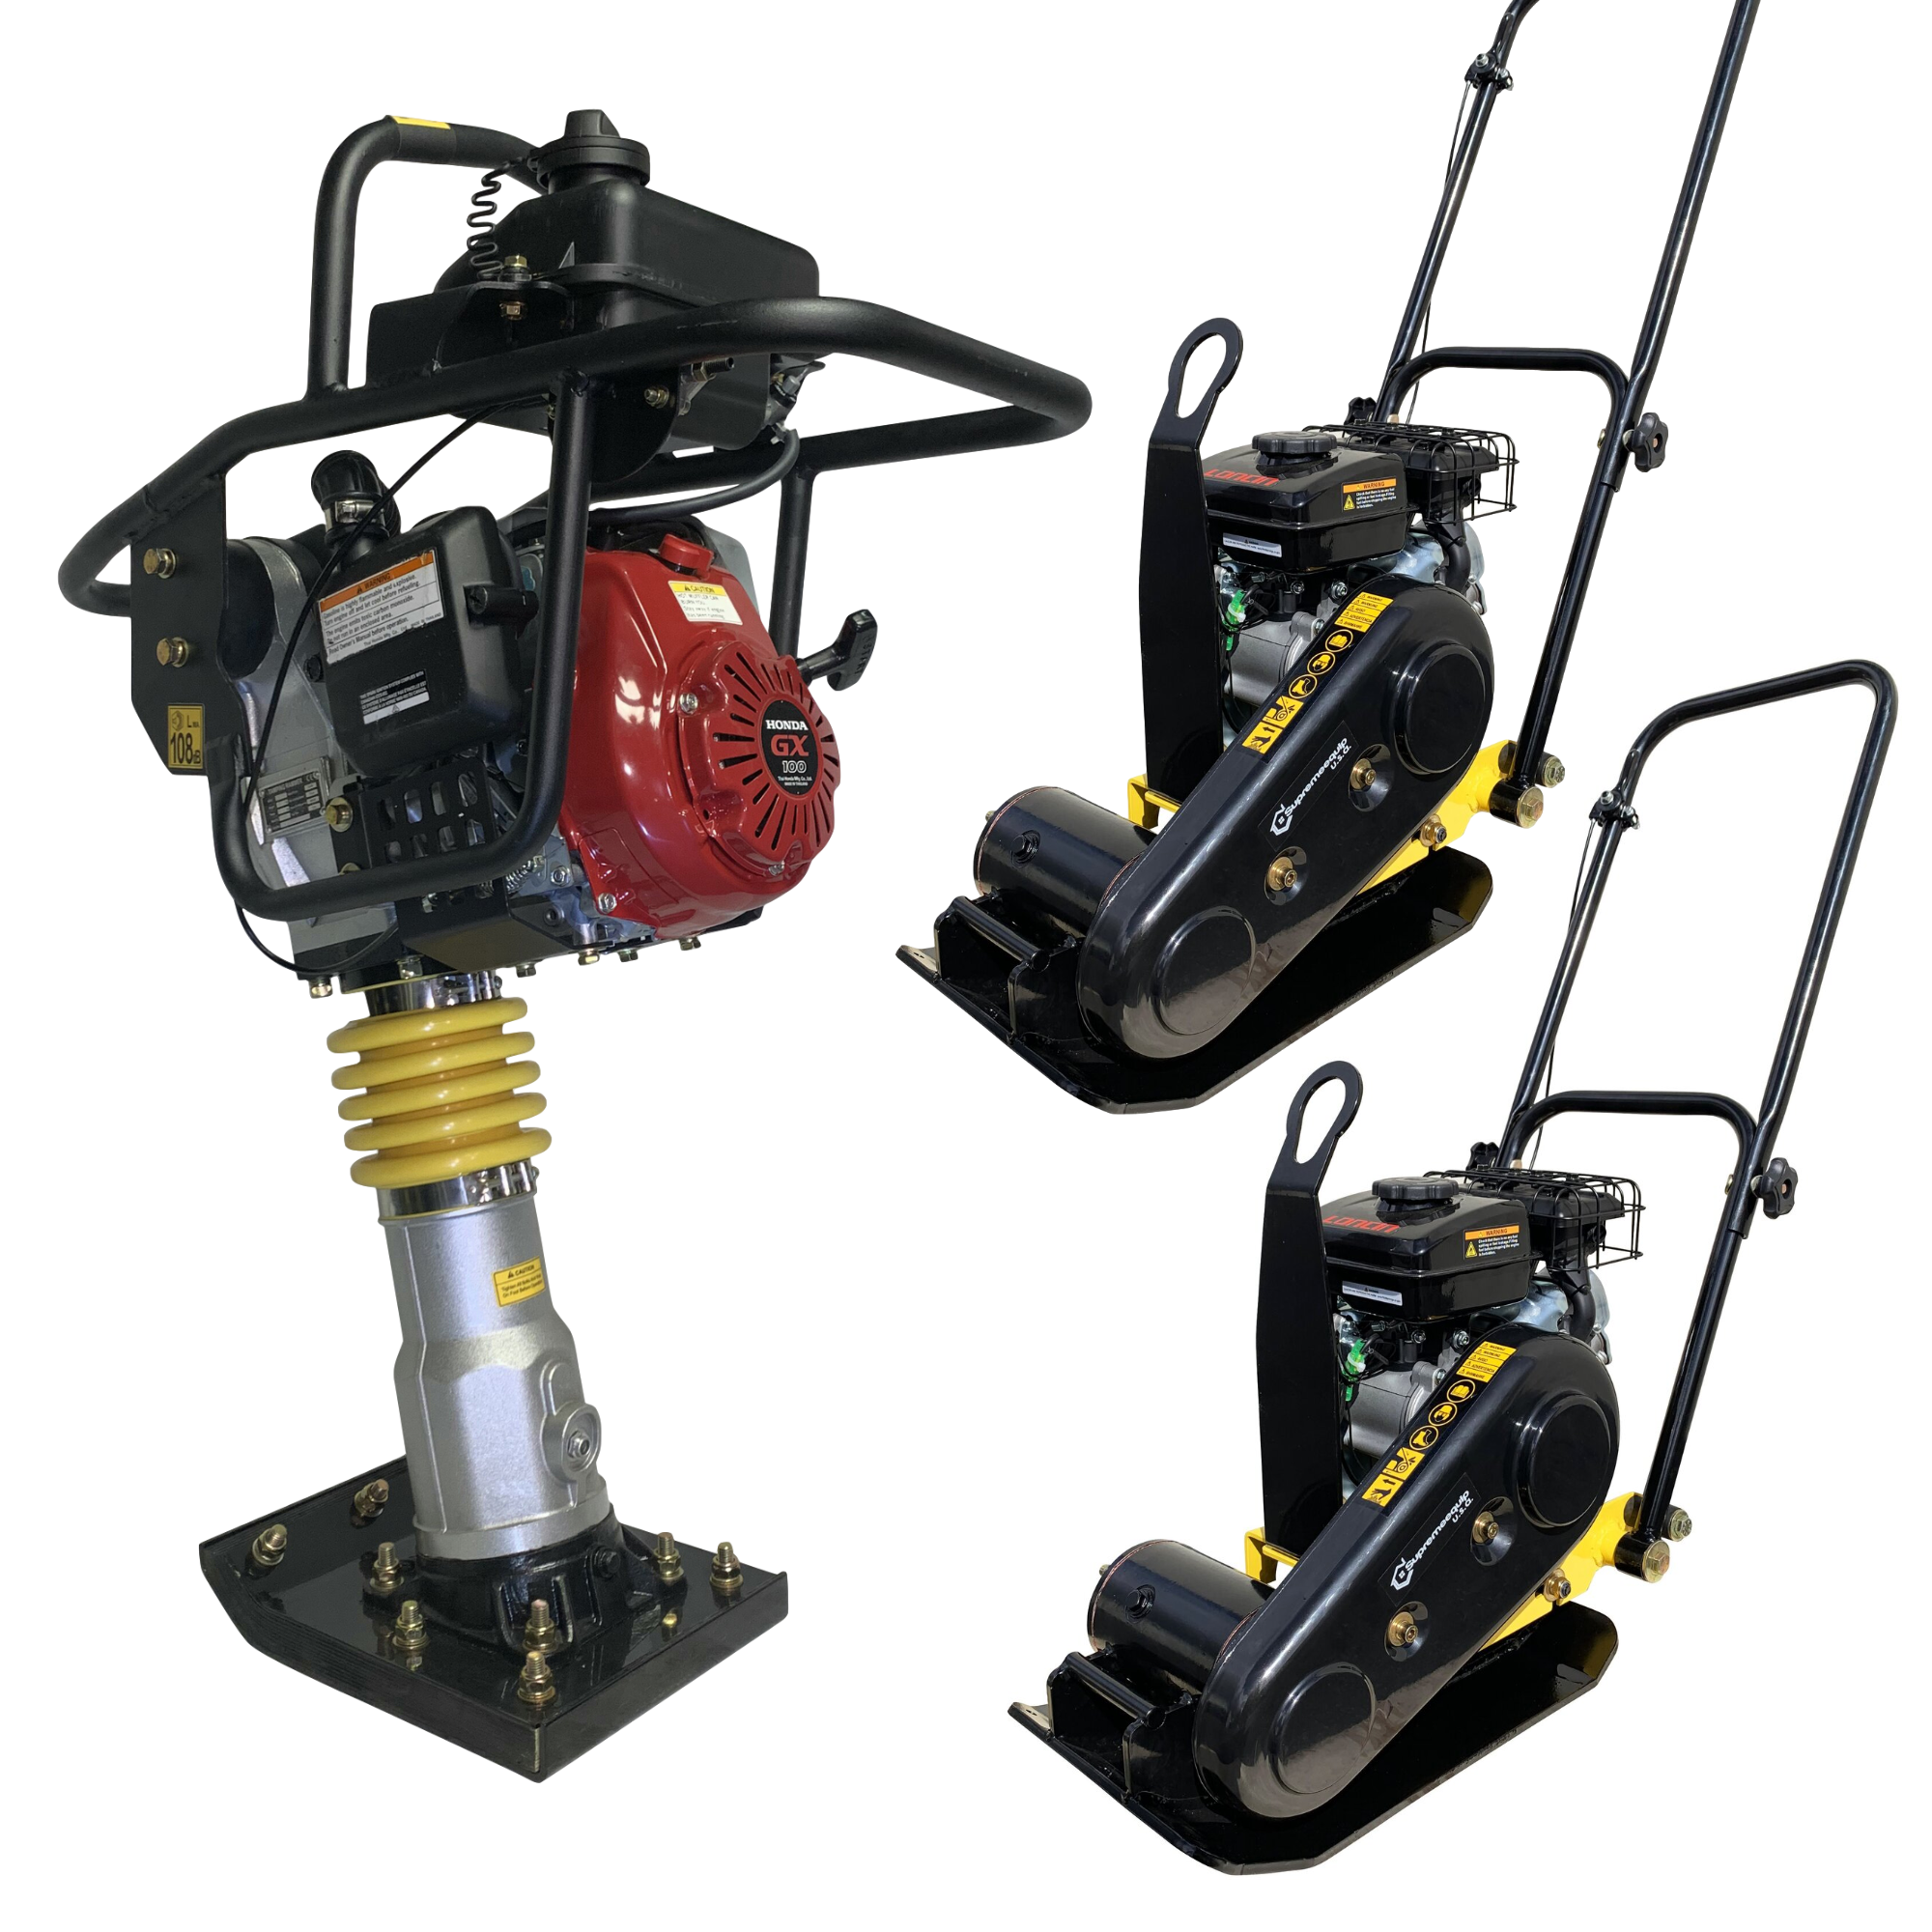 Honda GX100 Tamper Rammer AND 2 - 79CC Gas Vibration Plate Compactor COMBO